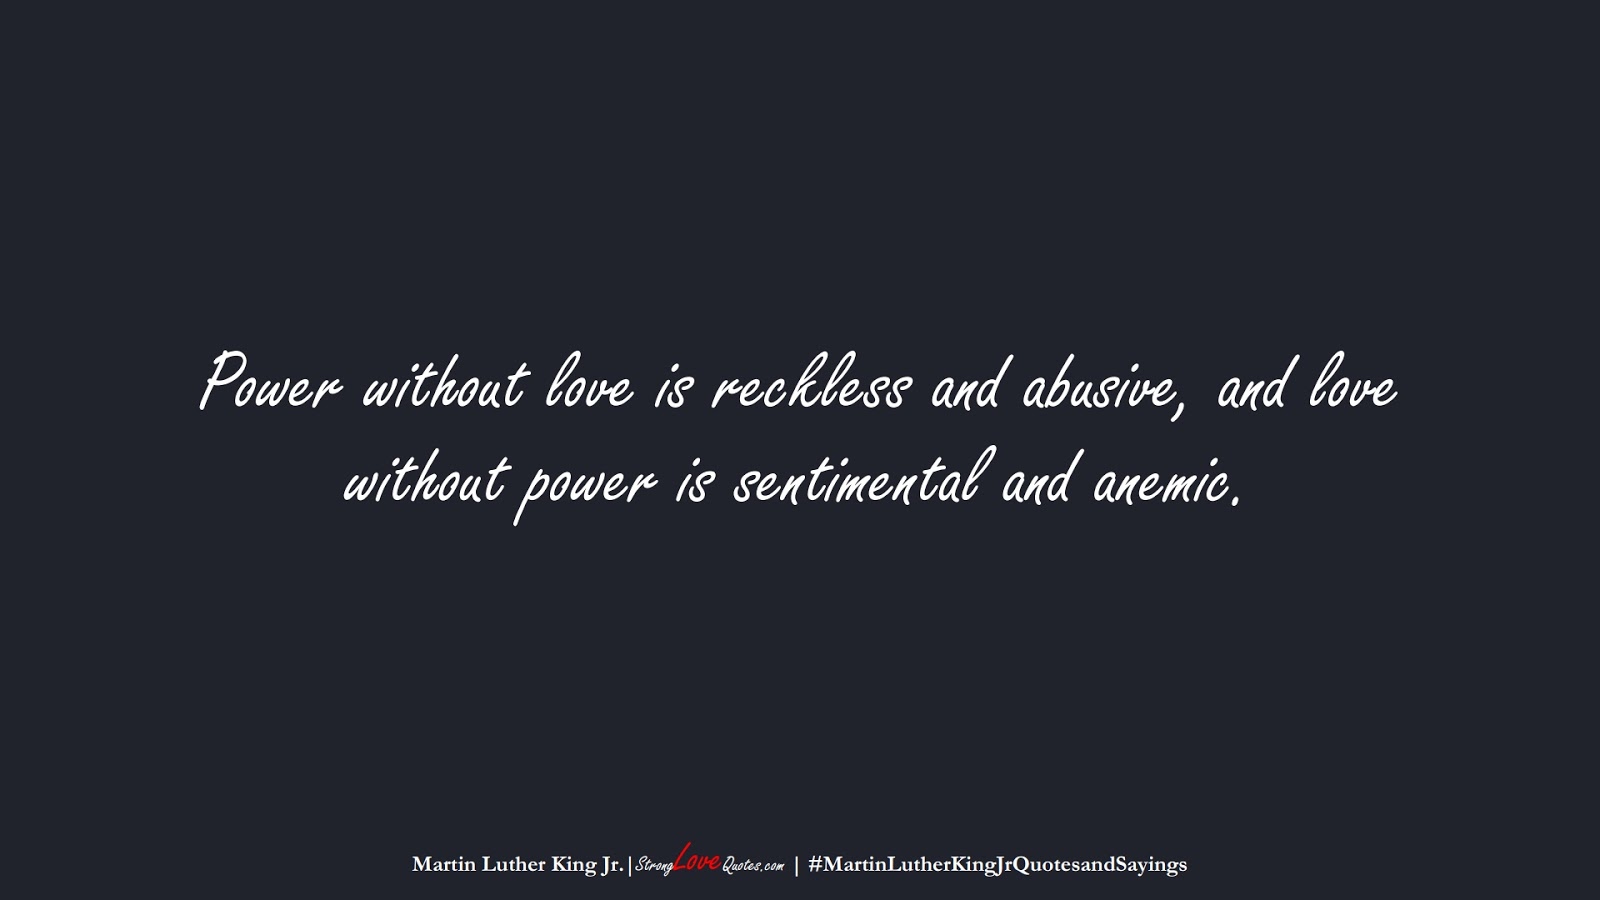 Power without love is reckless and abusive, and love without power is sentimental and anemic. (Martin Luther King Jr.);  #MartinLutherKingJrQuotesandSayings